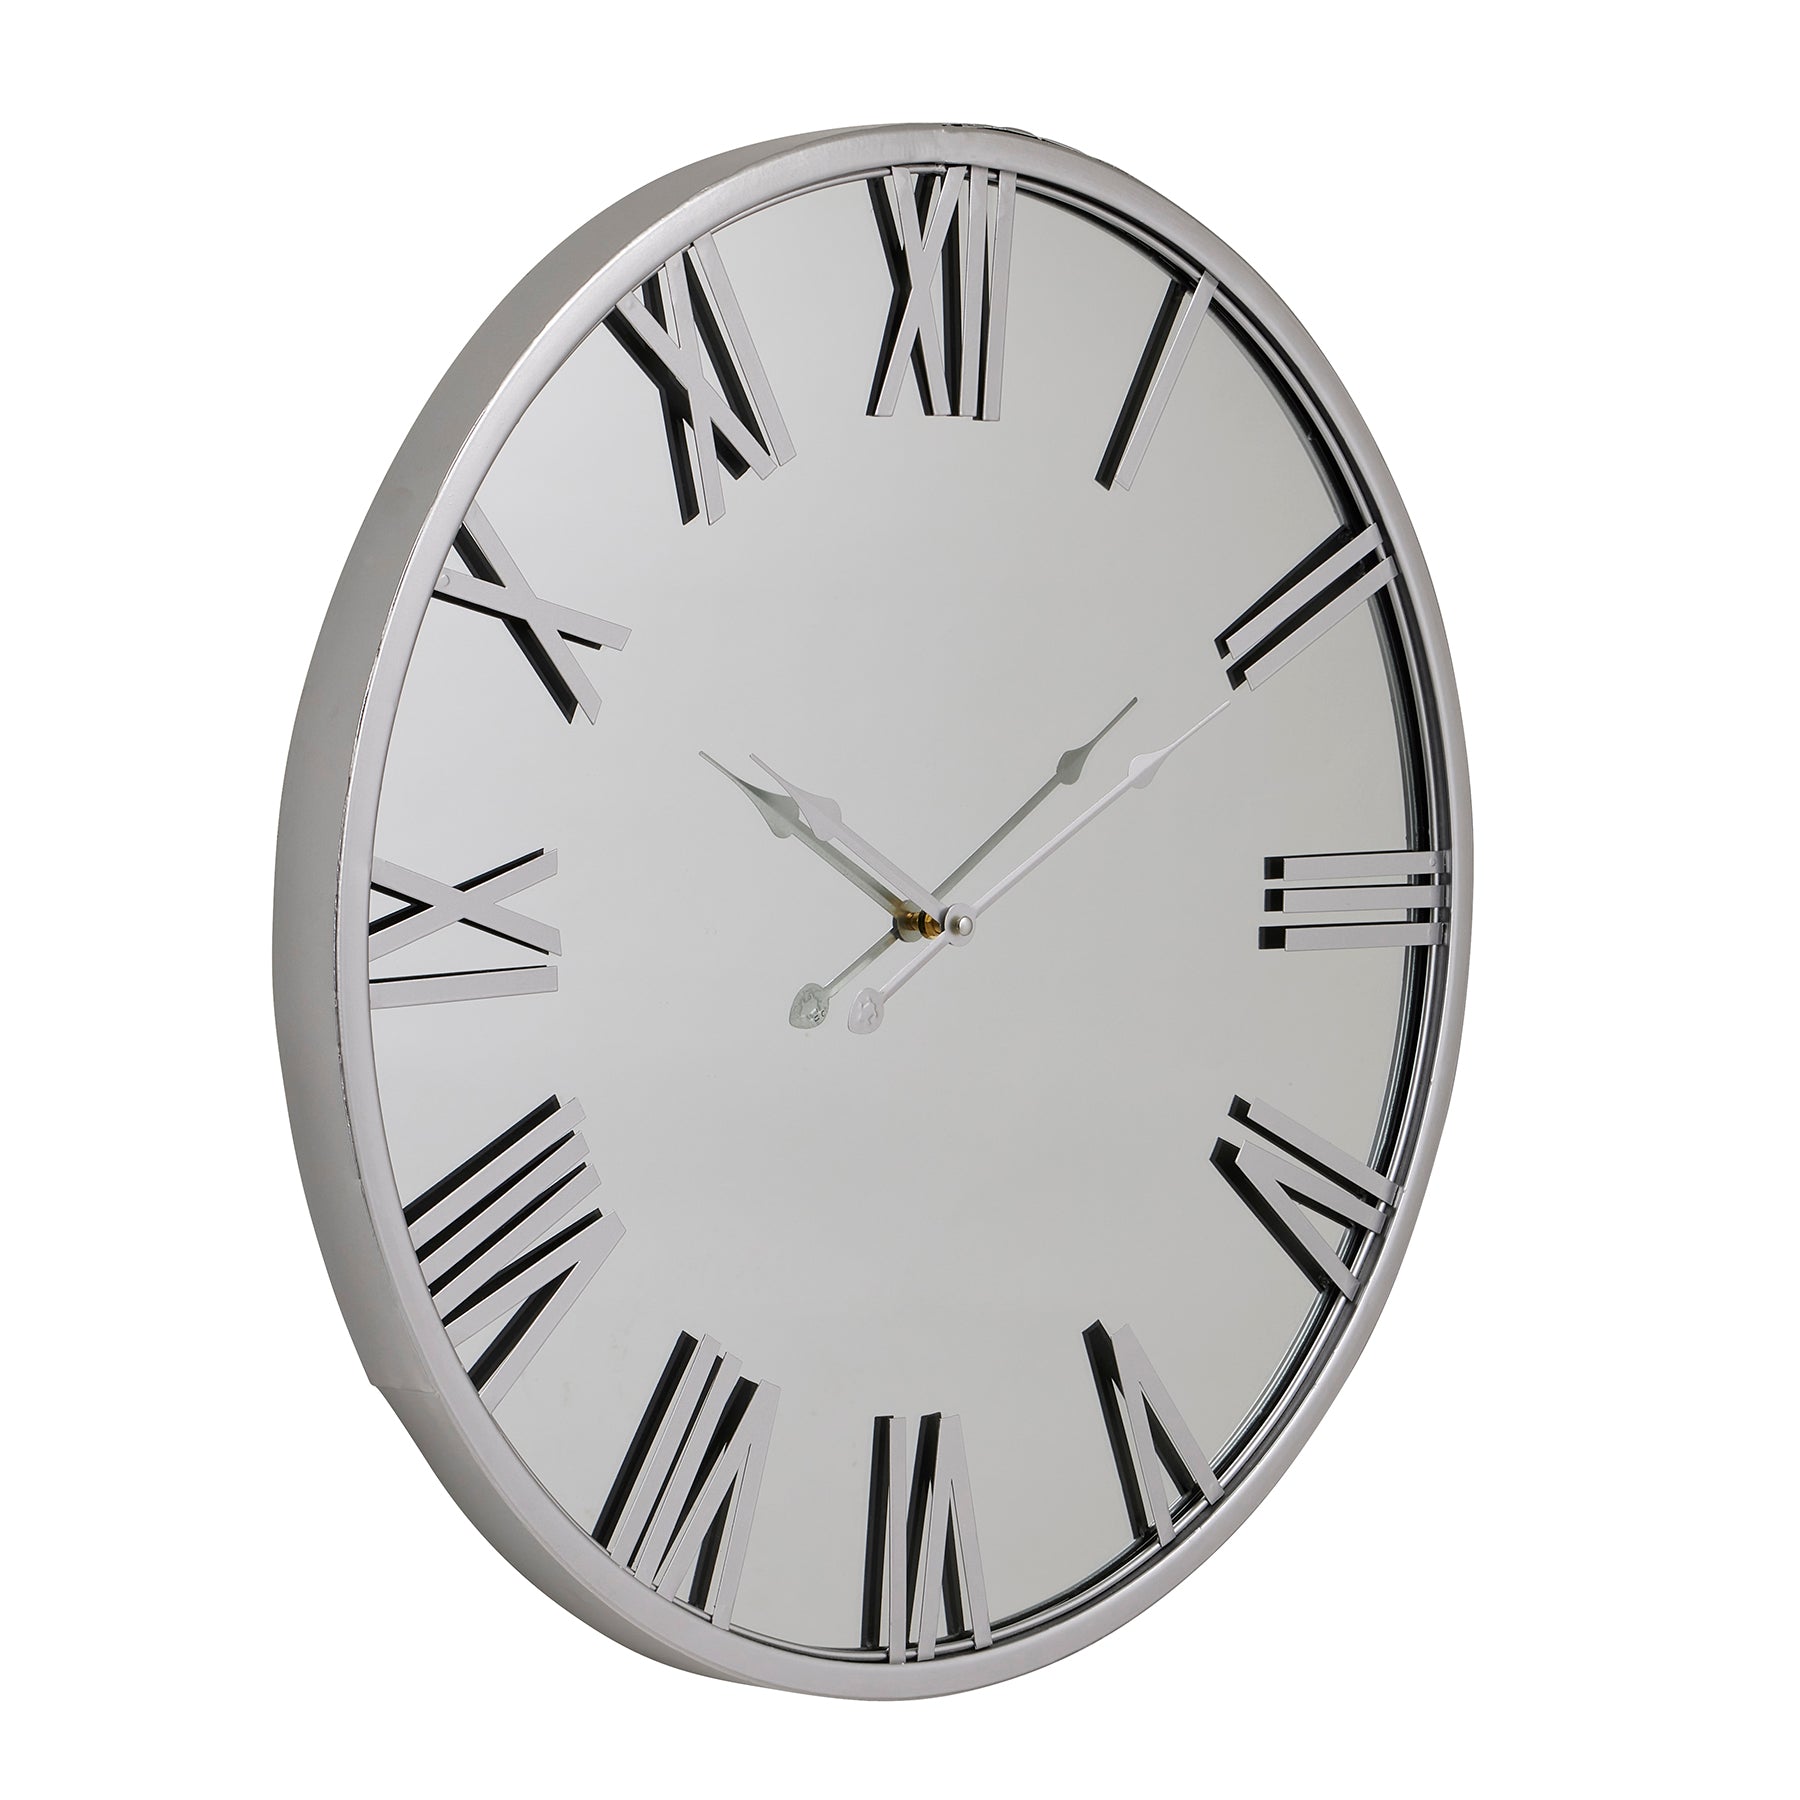 View Mayer Mirrored Wall Clock information